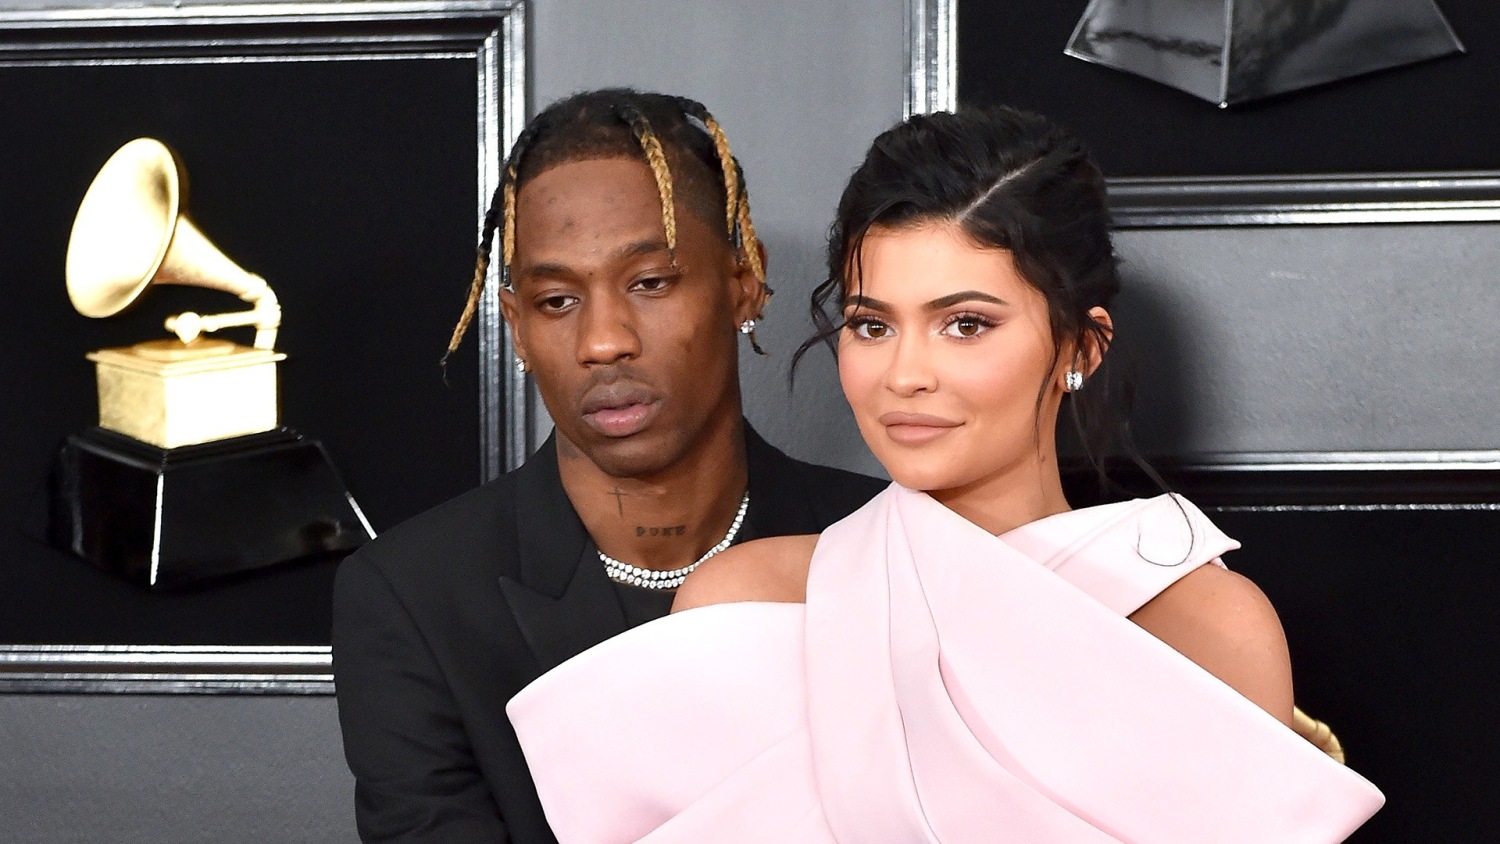 Travis Scott addresses claims he cheated on Kylie Jenner with Rojean Kar